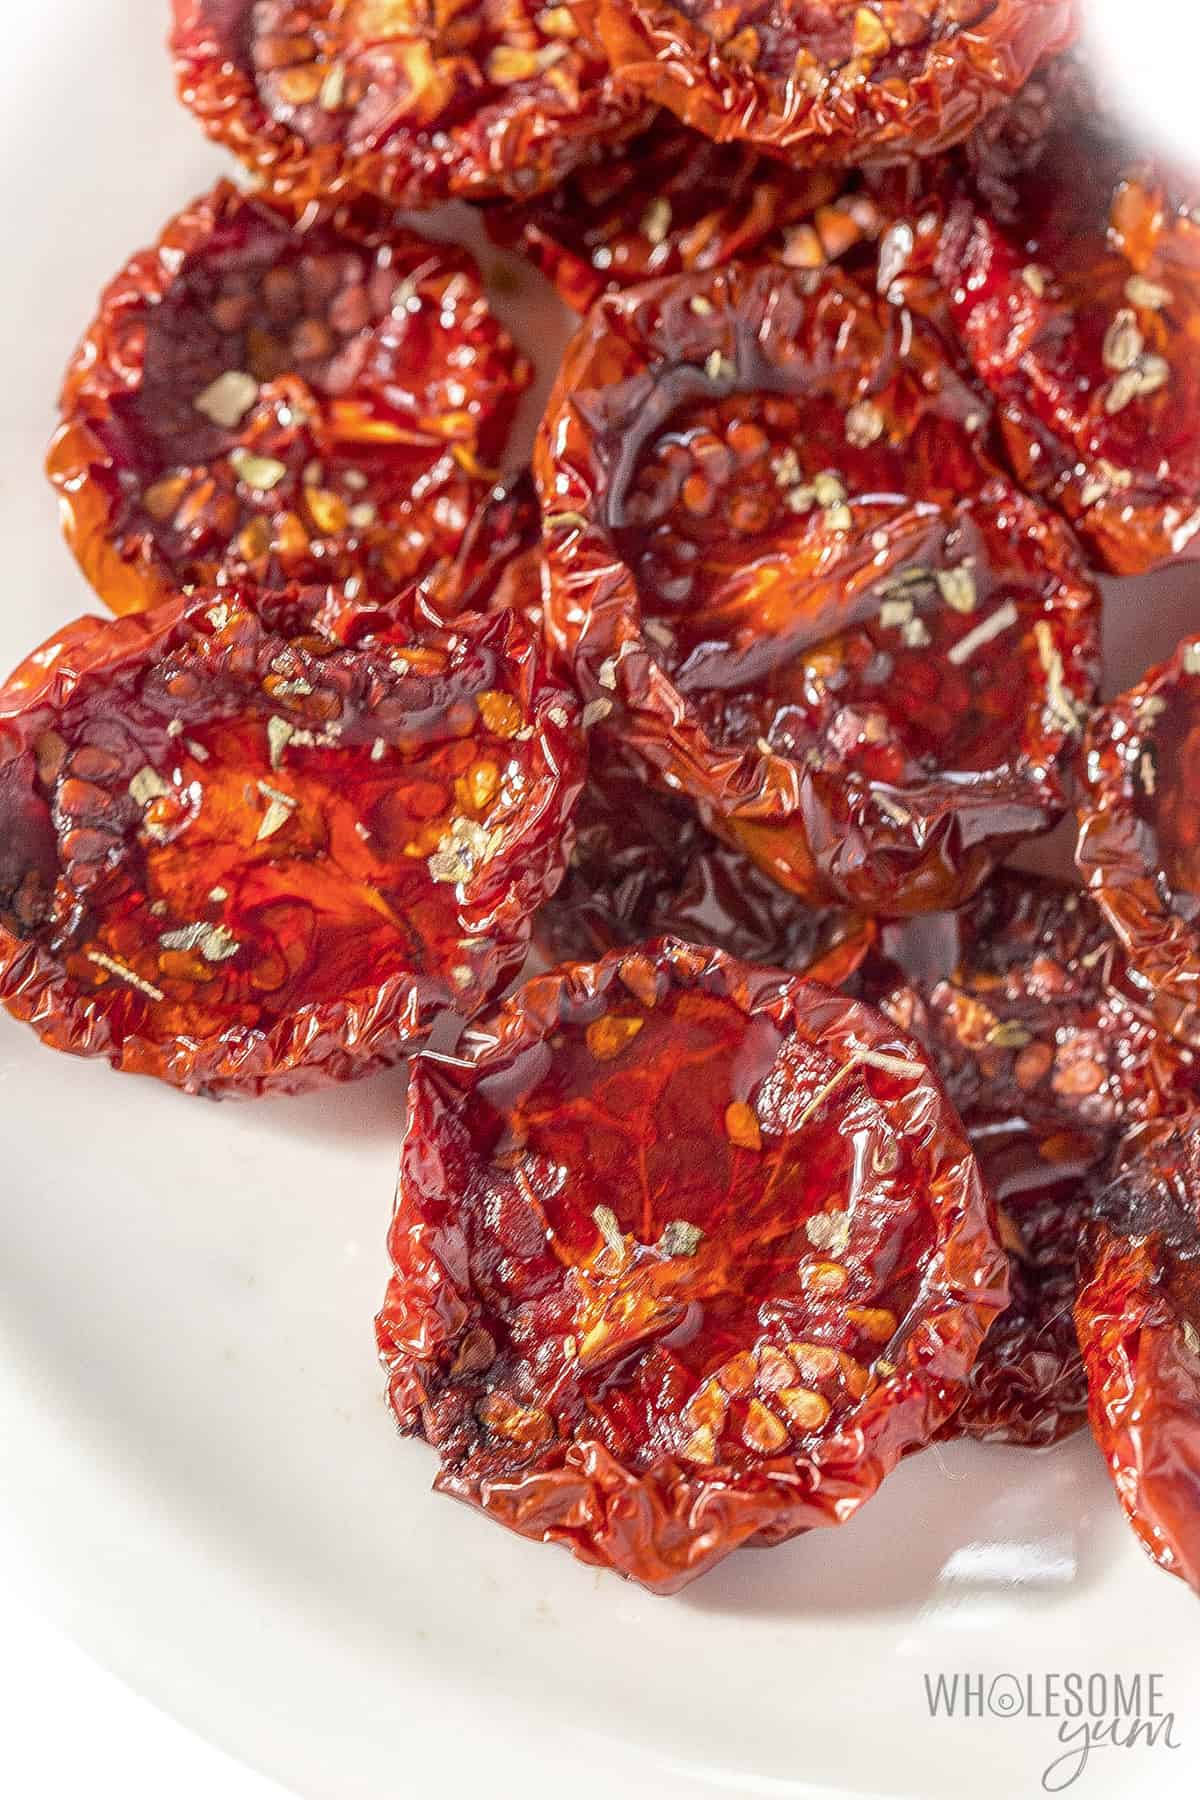 Sun drying tomatoes makes them come out sweet and flavorful like these.